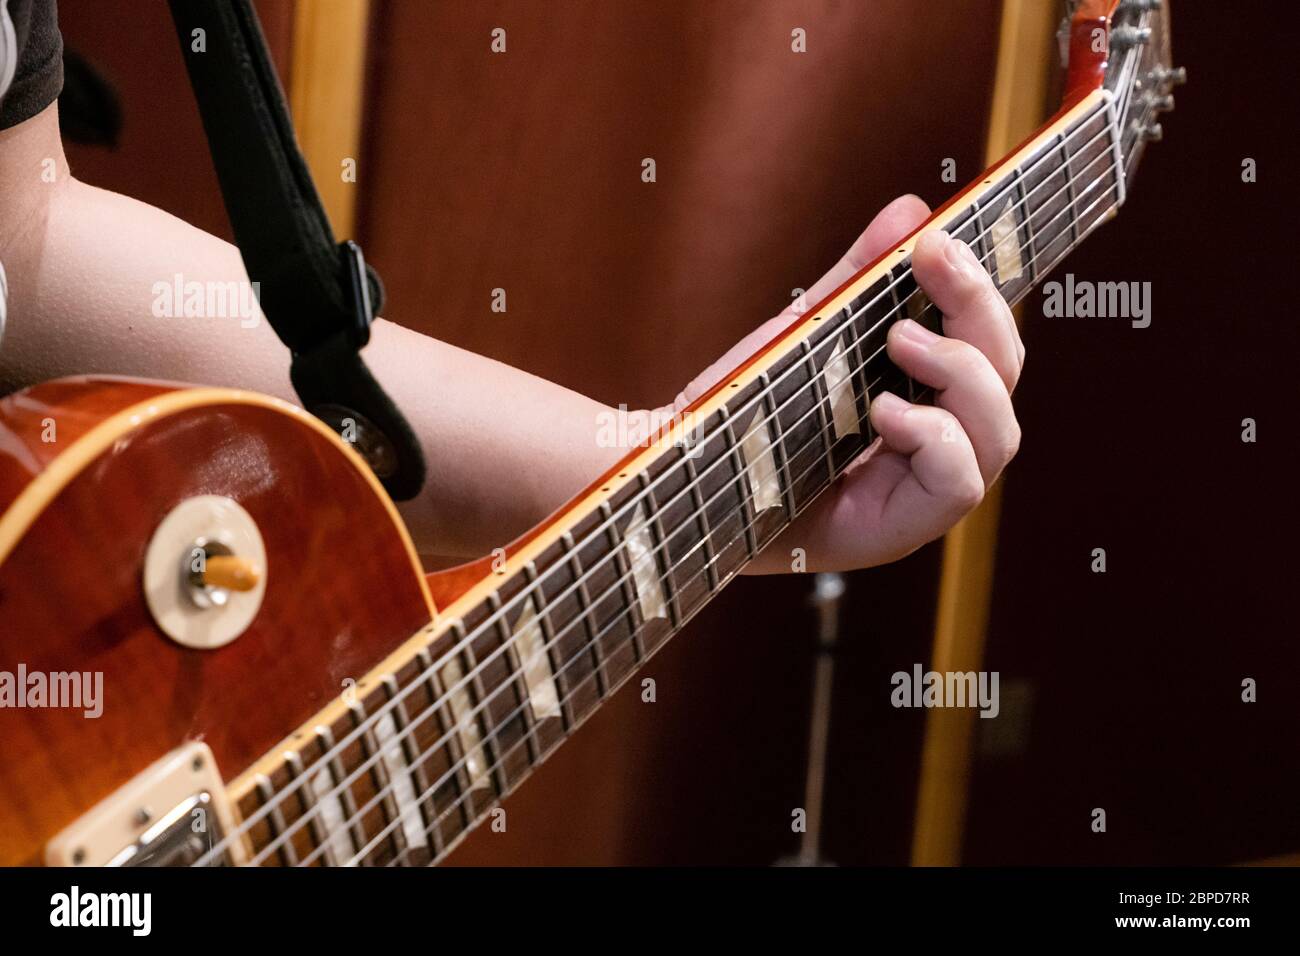 A man is playing electric guitar Stock Photo